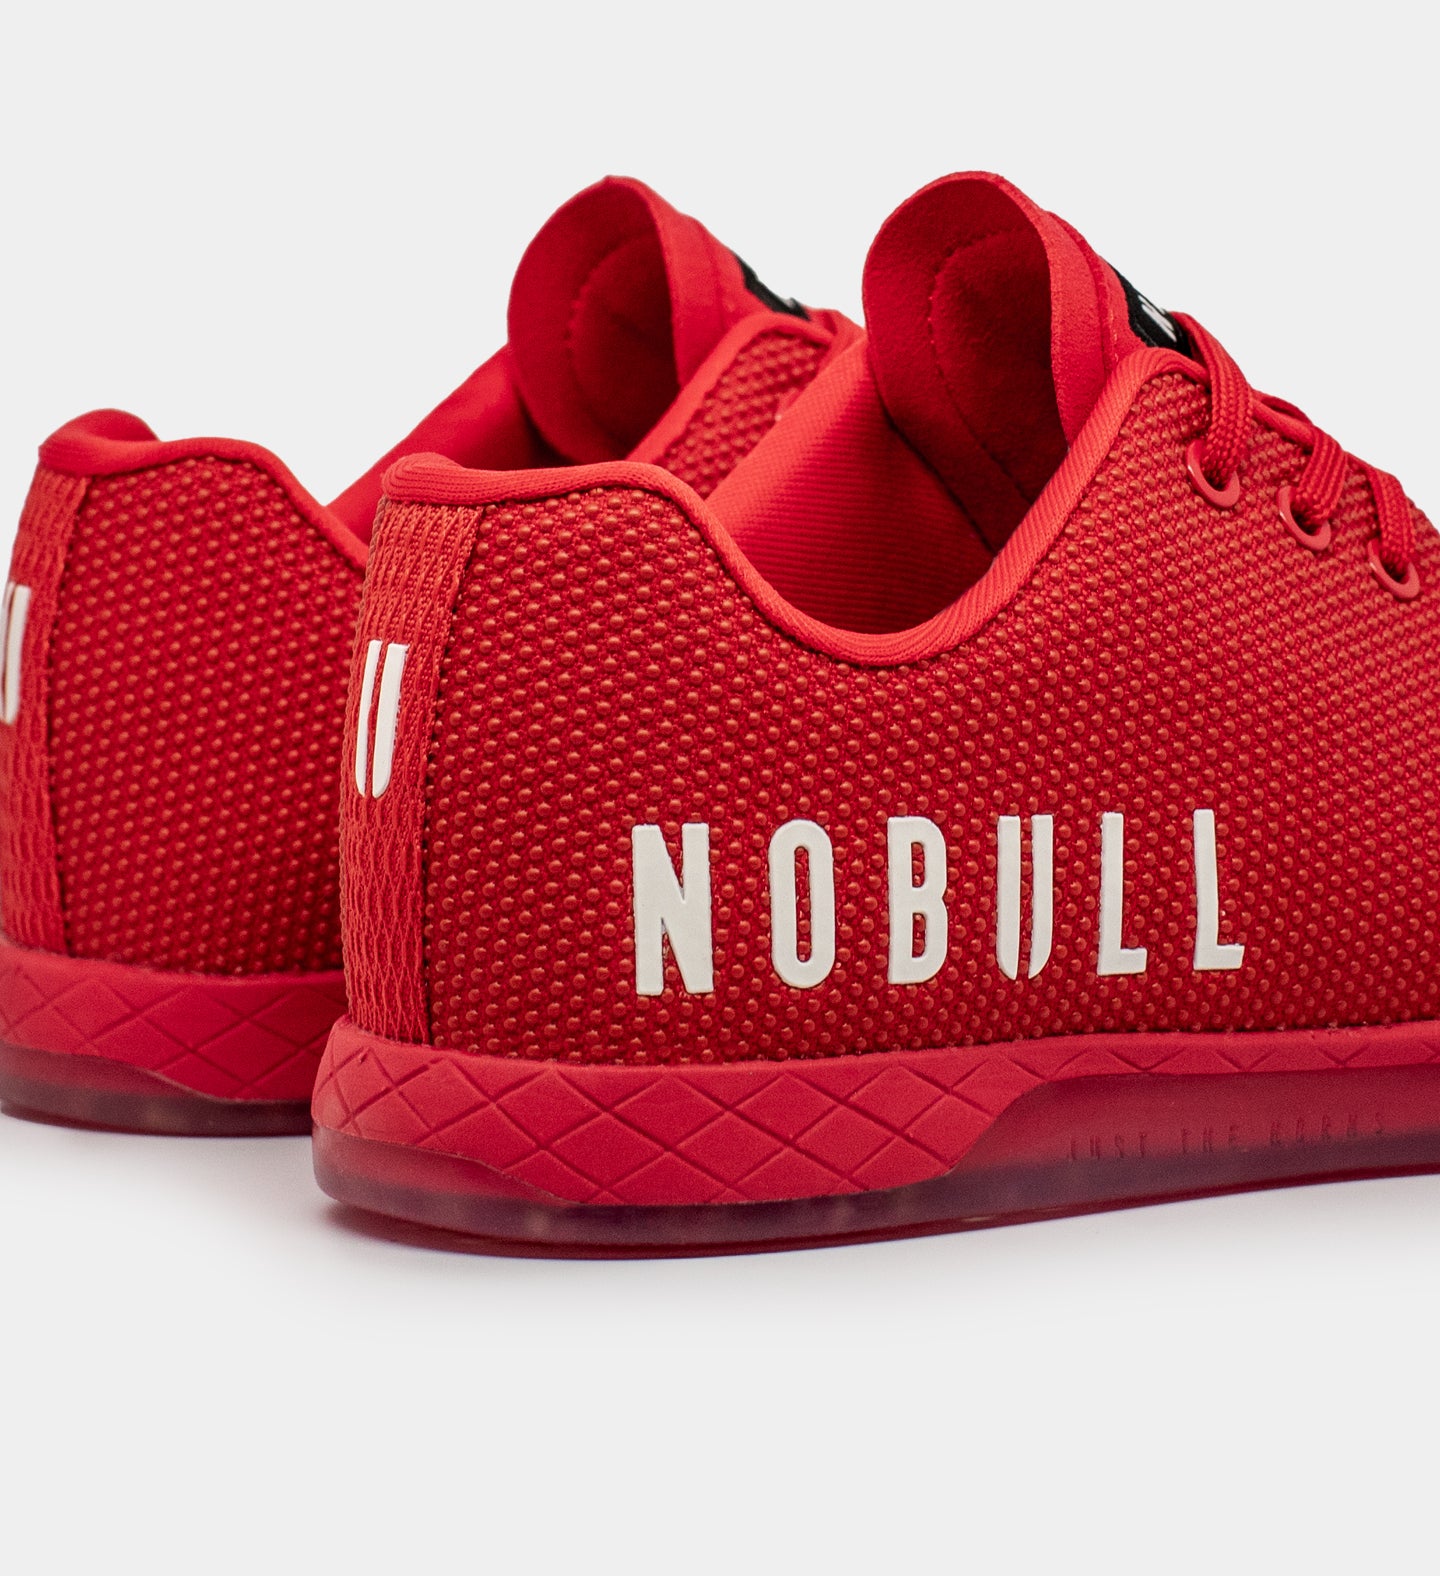 NOBULL - Women's Toomey Champions Trainer - Toomey Red - Size 7.5